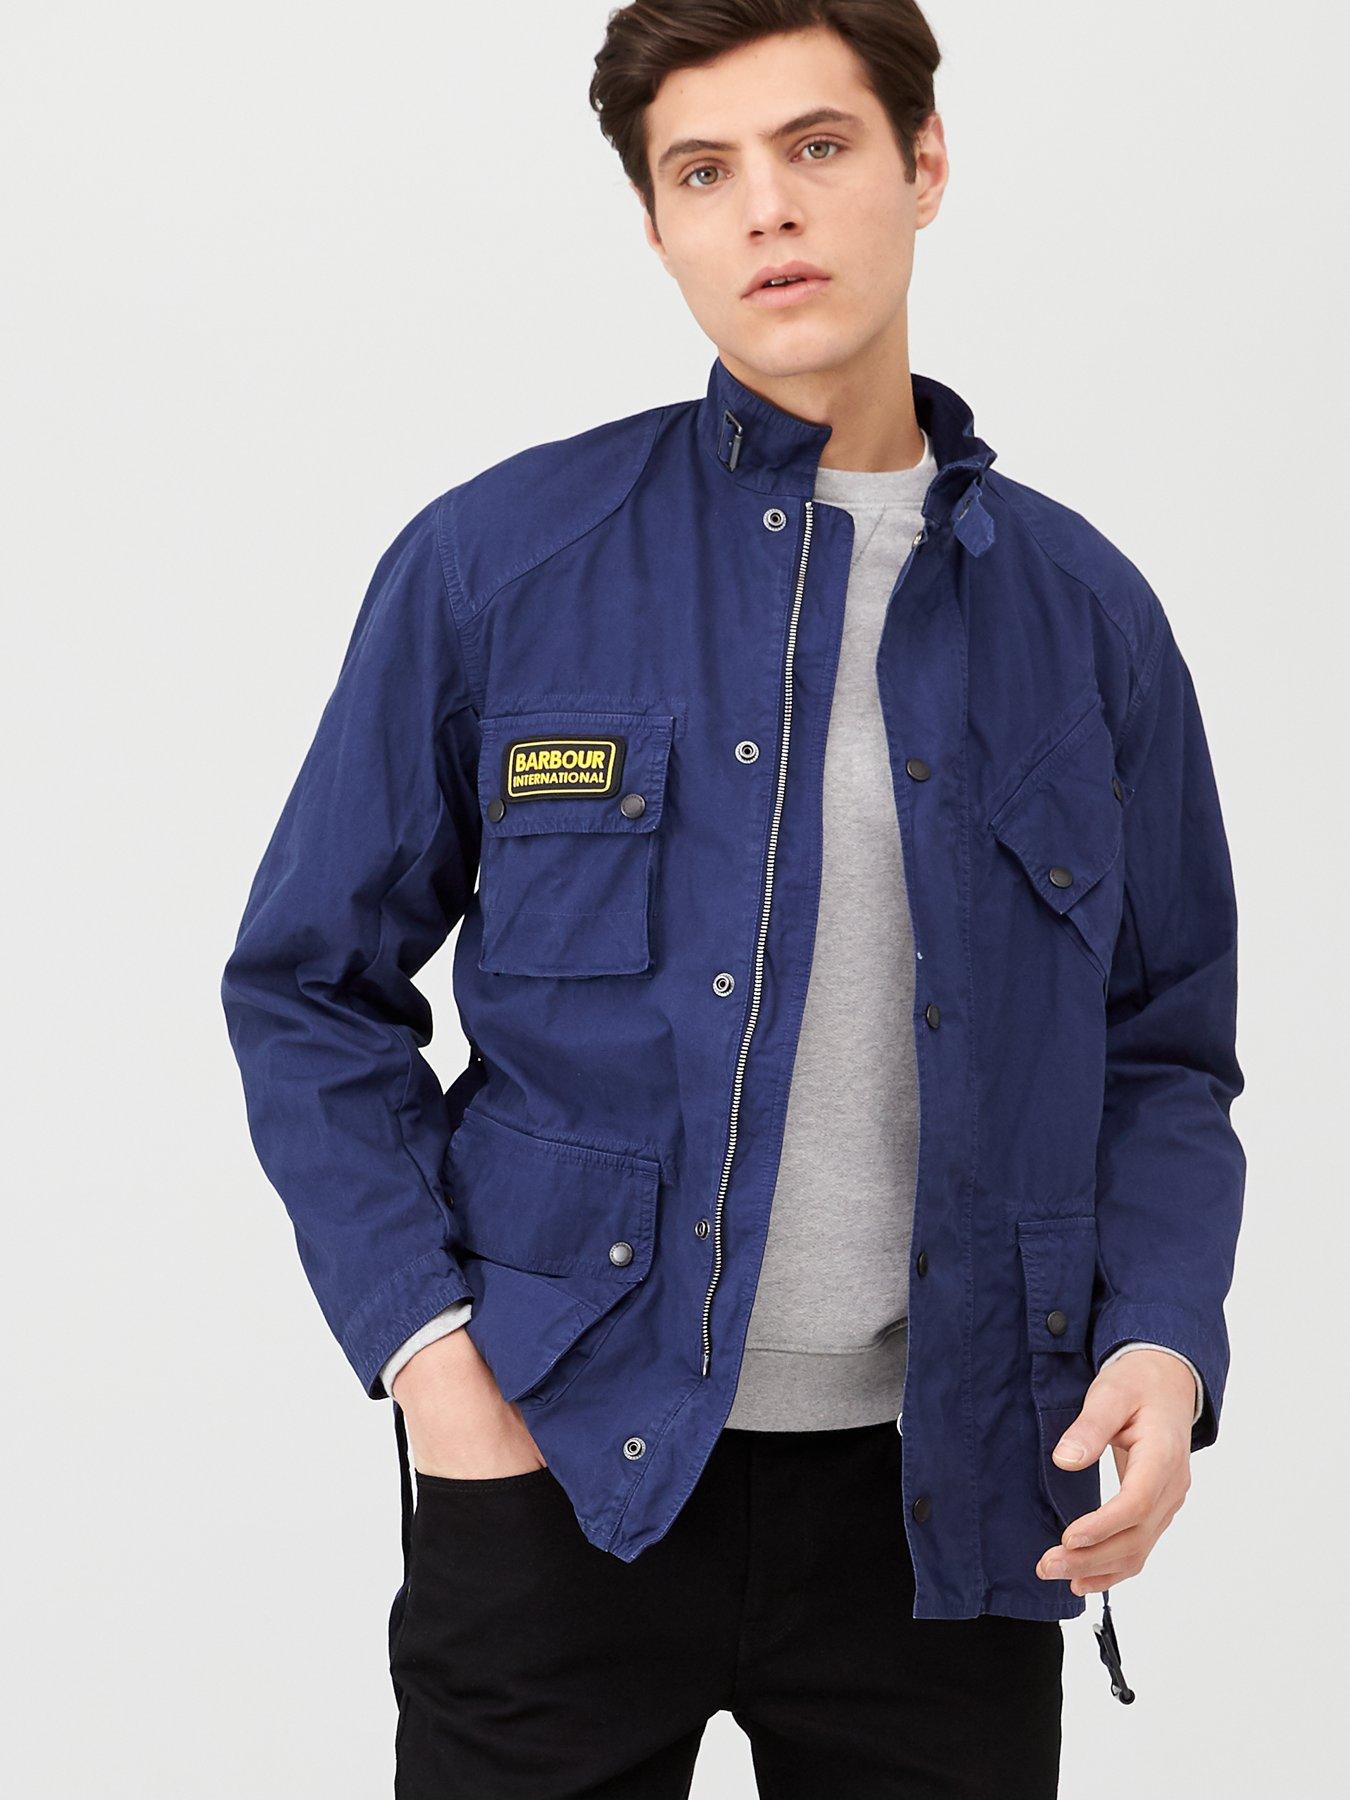 how do you clean a barbour jacket